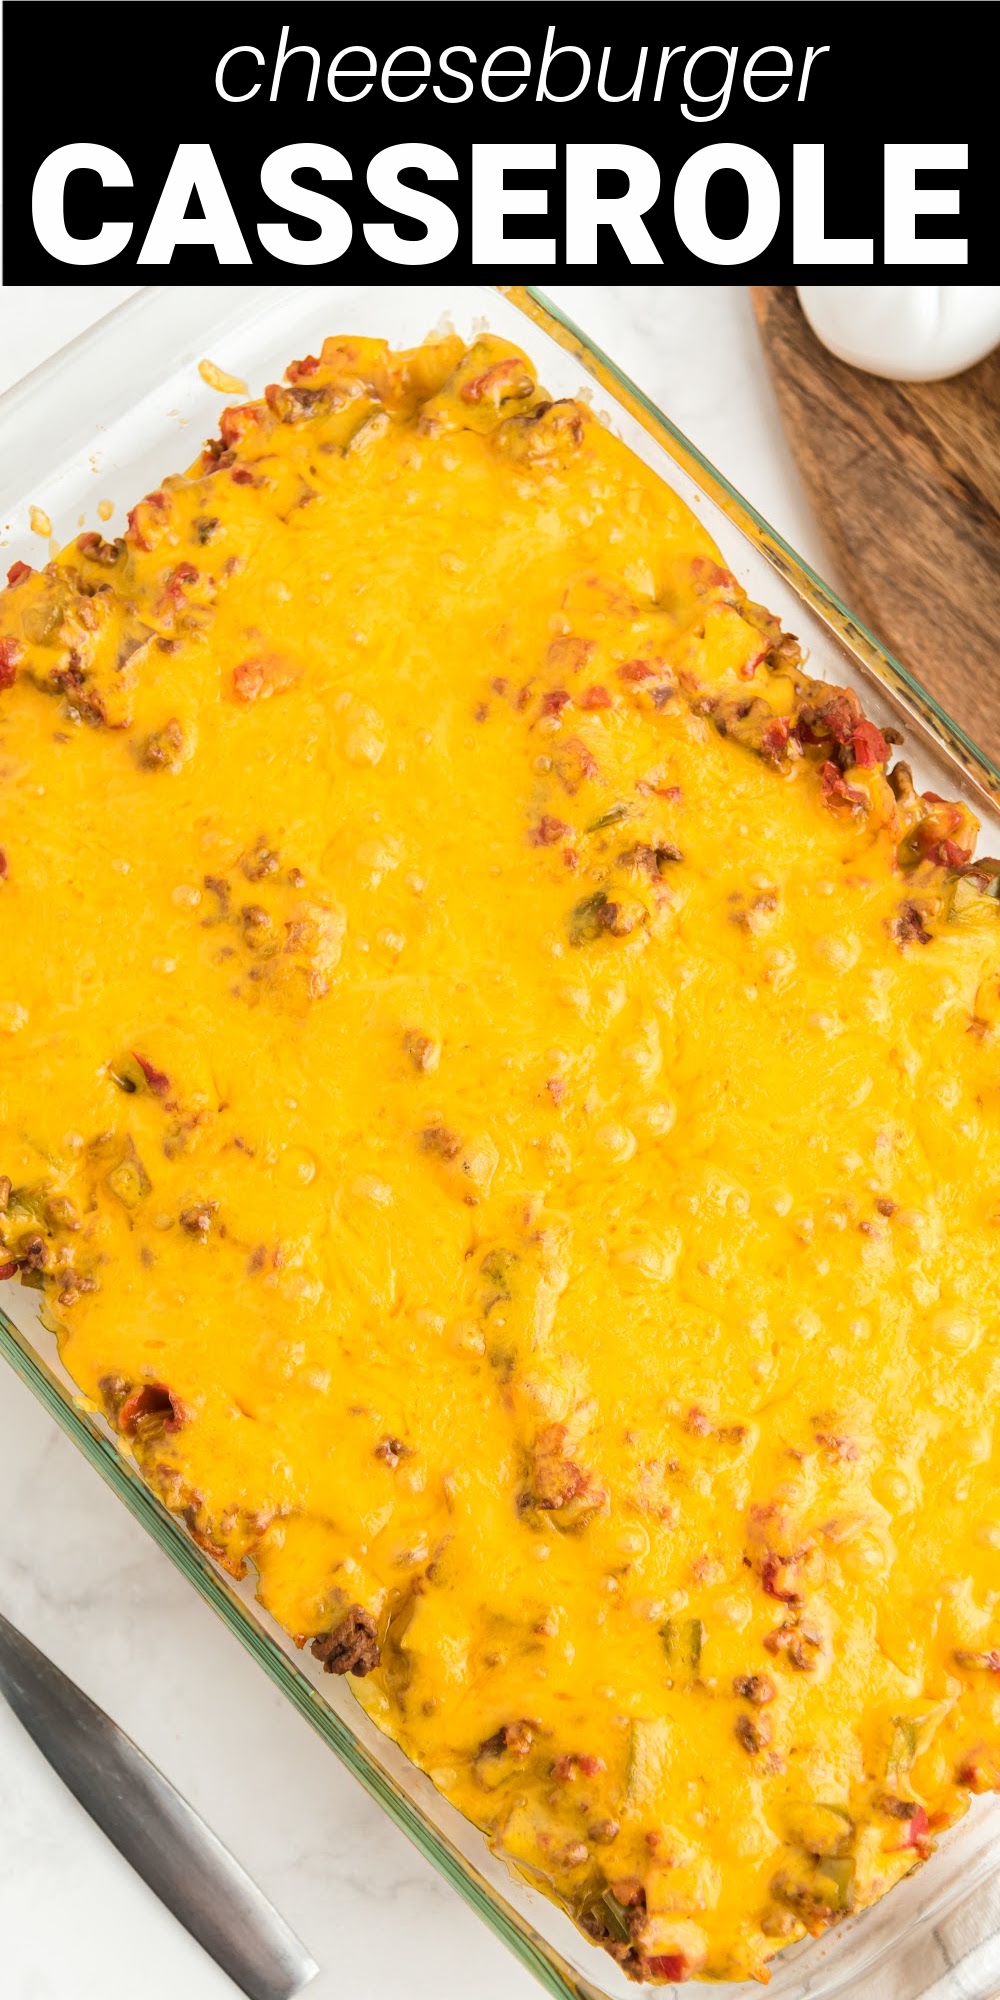 This cheeseburger casserole tastes like a juicy cheeseburger without the bun. Tender ground beef is paired with diced tomatoes, simple seasonings, and is tossed with elbow macaroni and topped with melted cheddar cheese making the most amazing meal.